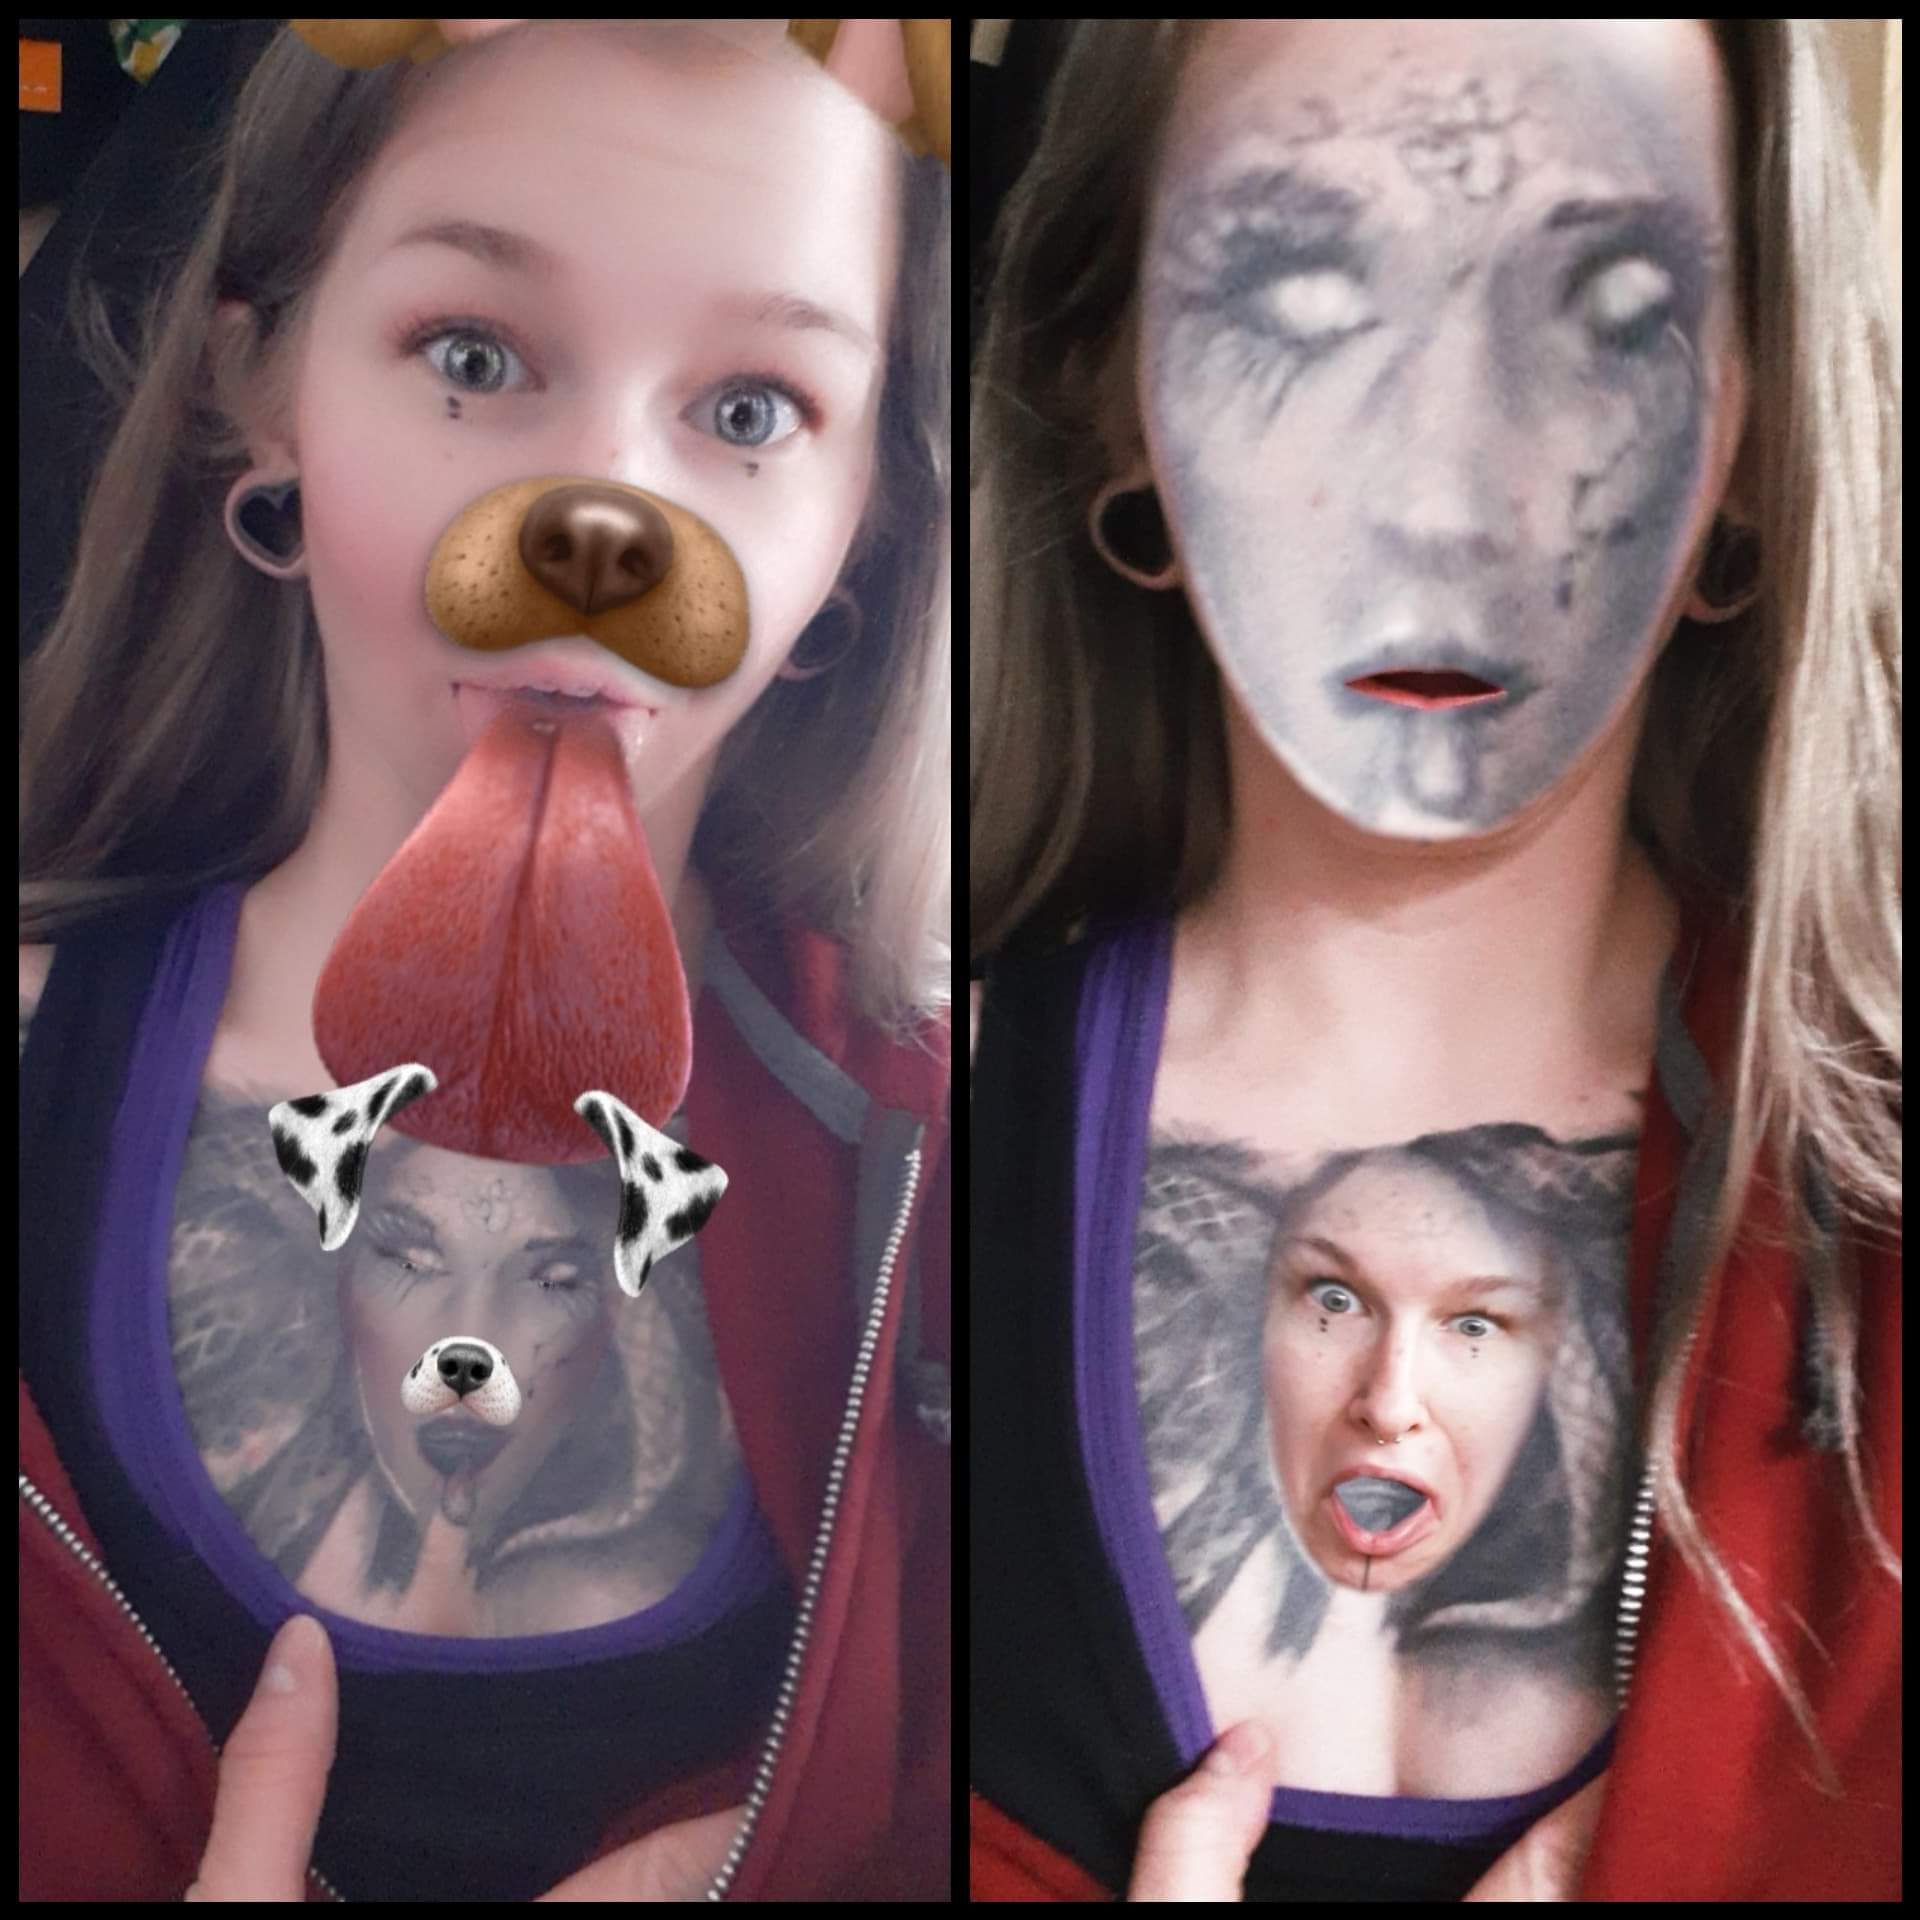 My friend just figured out that the snapchat filters work on her chest tattoo.